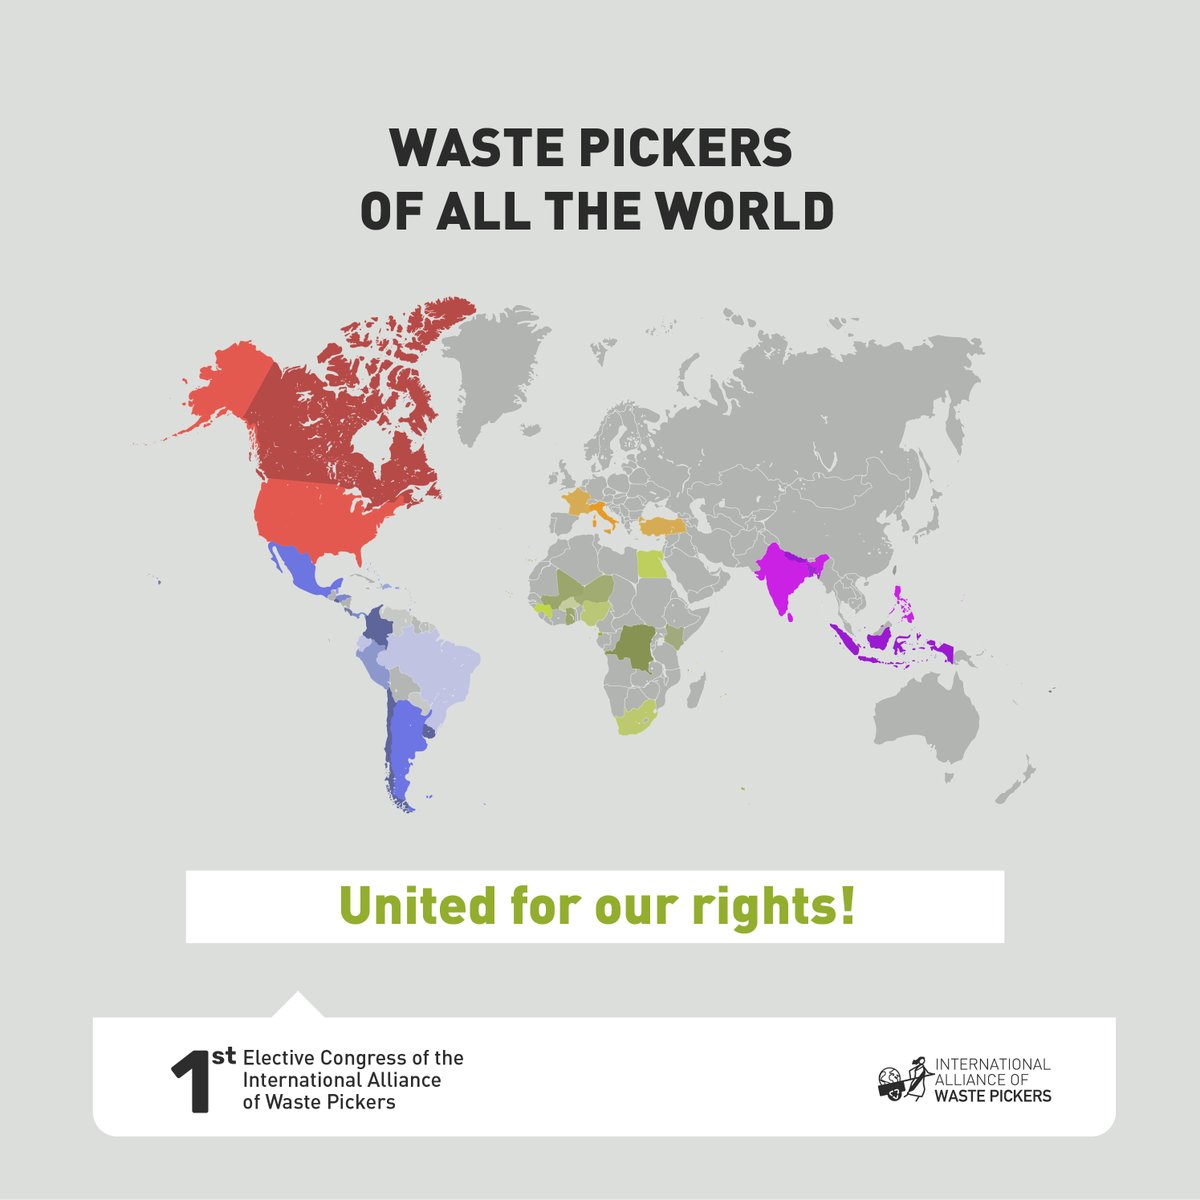 We at the #internationalallianceofwastepickers come together from 50 organizations present in 34 countries to defend our rights as workers.